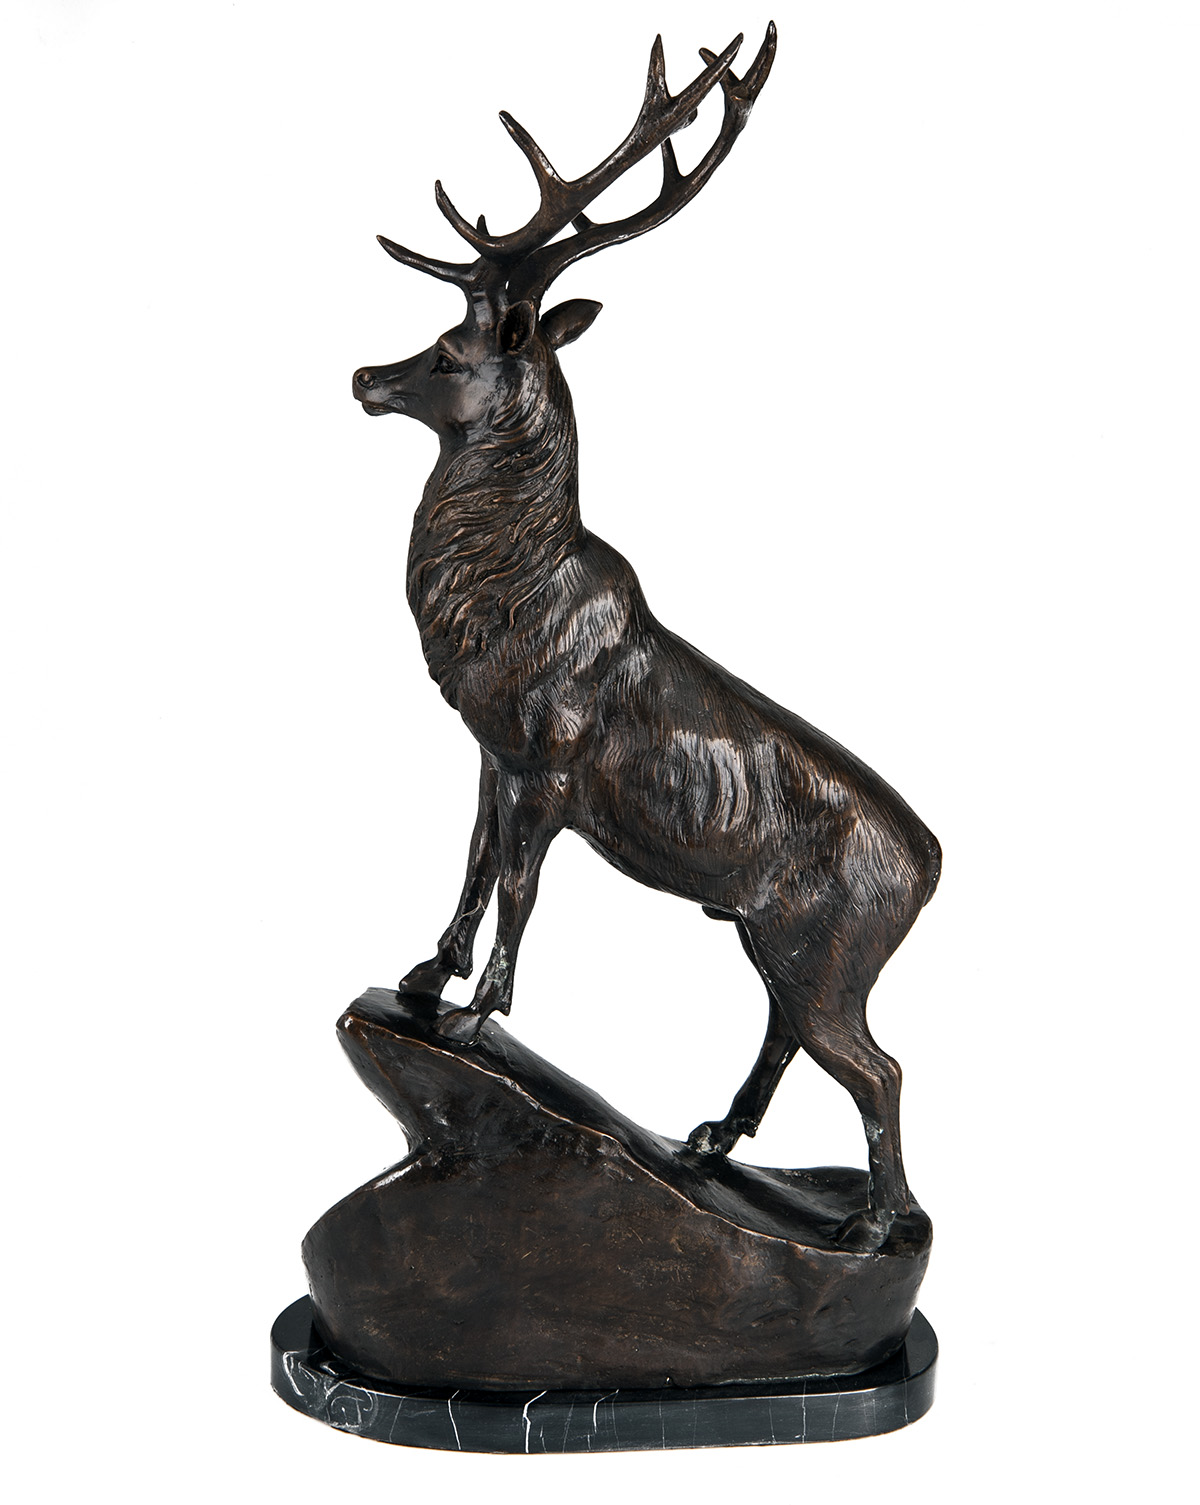 A PAIR OF BRONZE STAGS SIGNED BY T. MAIGNIERY, each standing on a rocky prominence and mounted on - Image 3 of 7